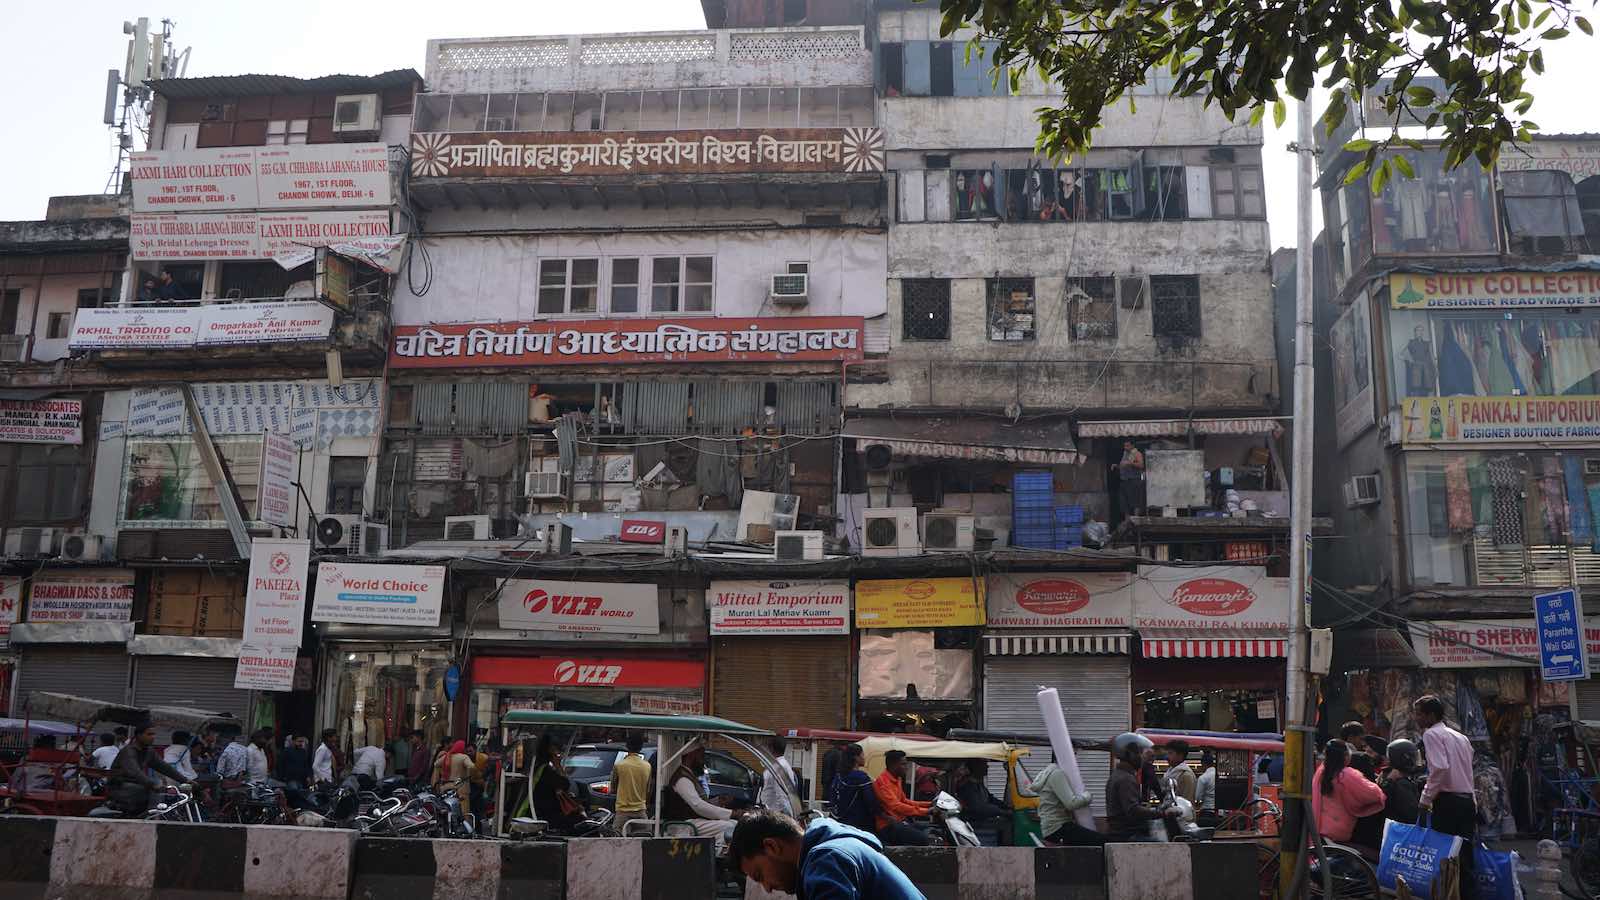 Decided to get out of the area I was in and go to Old Delhi, it's exactly what it's name implies. The oldest part of Delhi. Buildings along the street were quite run down but it looked like this in a lot of areas of New Delhi.